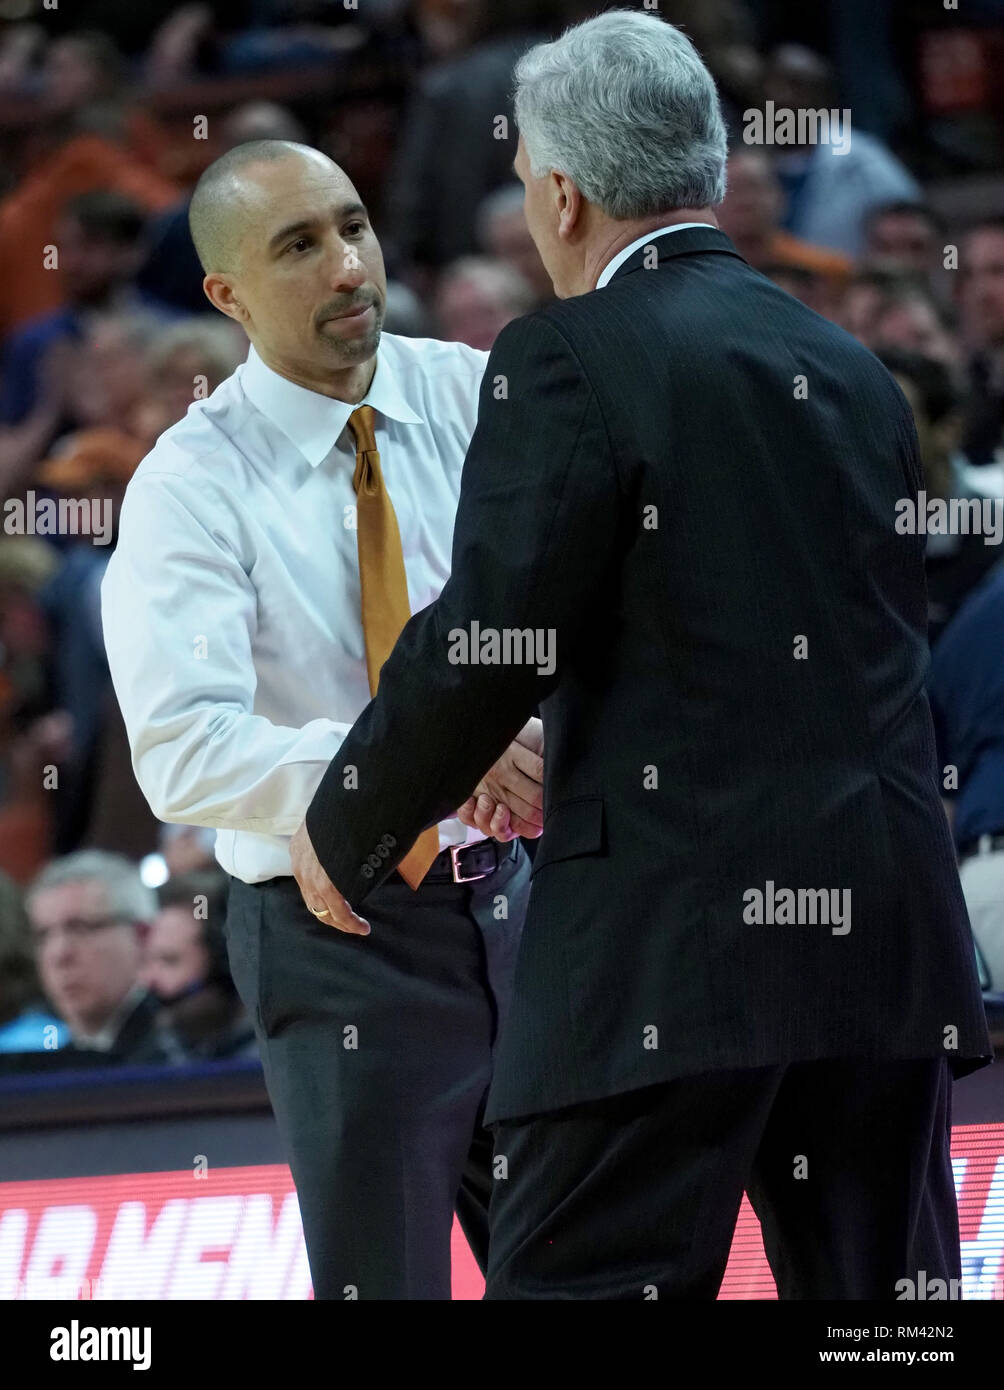 Feb 12, 2019. Head coach Bruce Weber of the Kansas State Wildcats shakes ShakaSmarts hand after the game vs the Texas Longhorns at the Frank Erwin Center in Austin Texas.Robert Backman/Cal Sport Media. Stock Photo